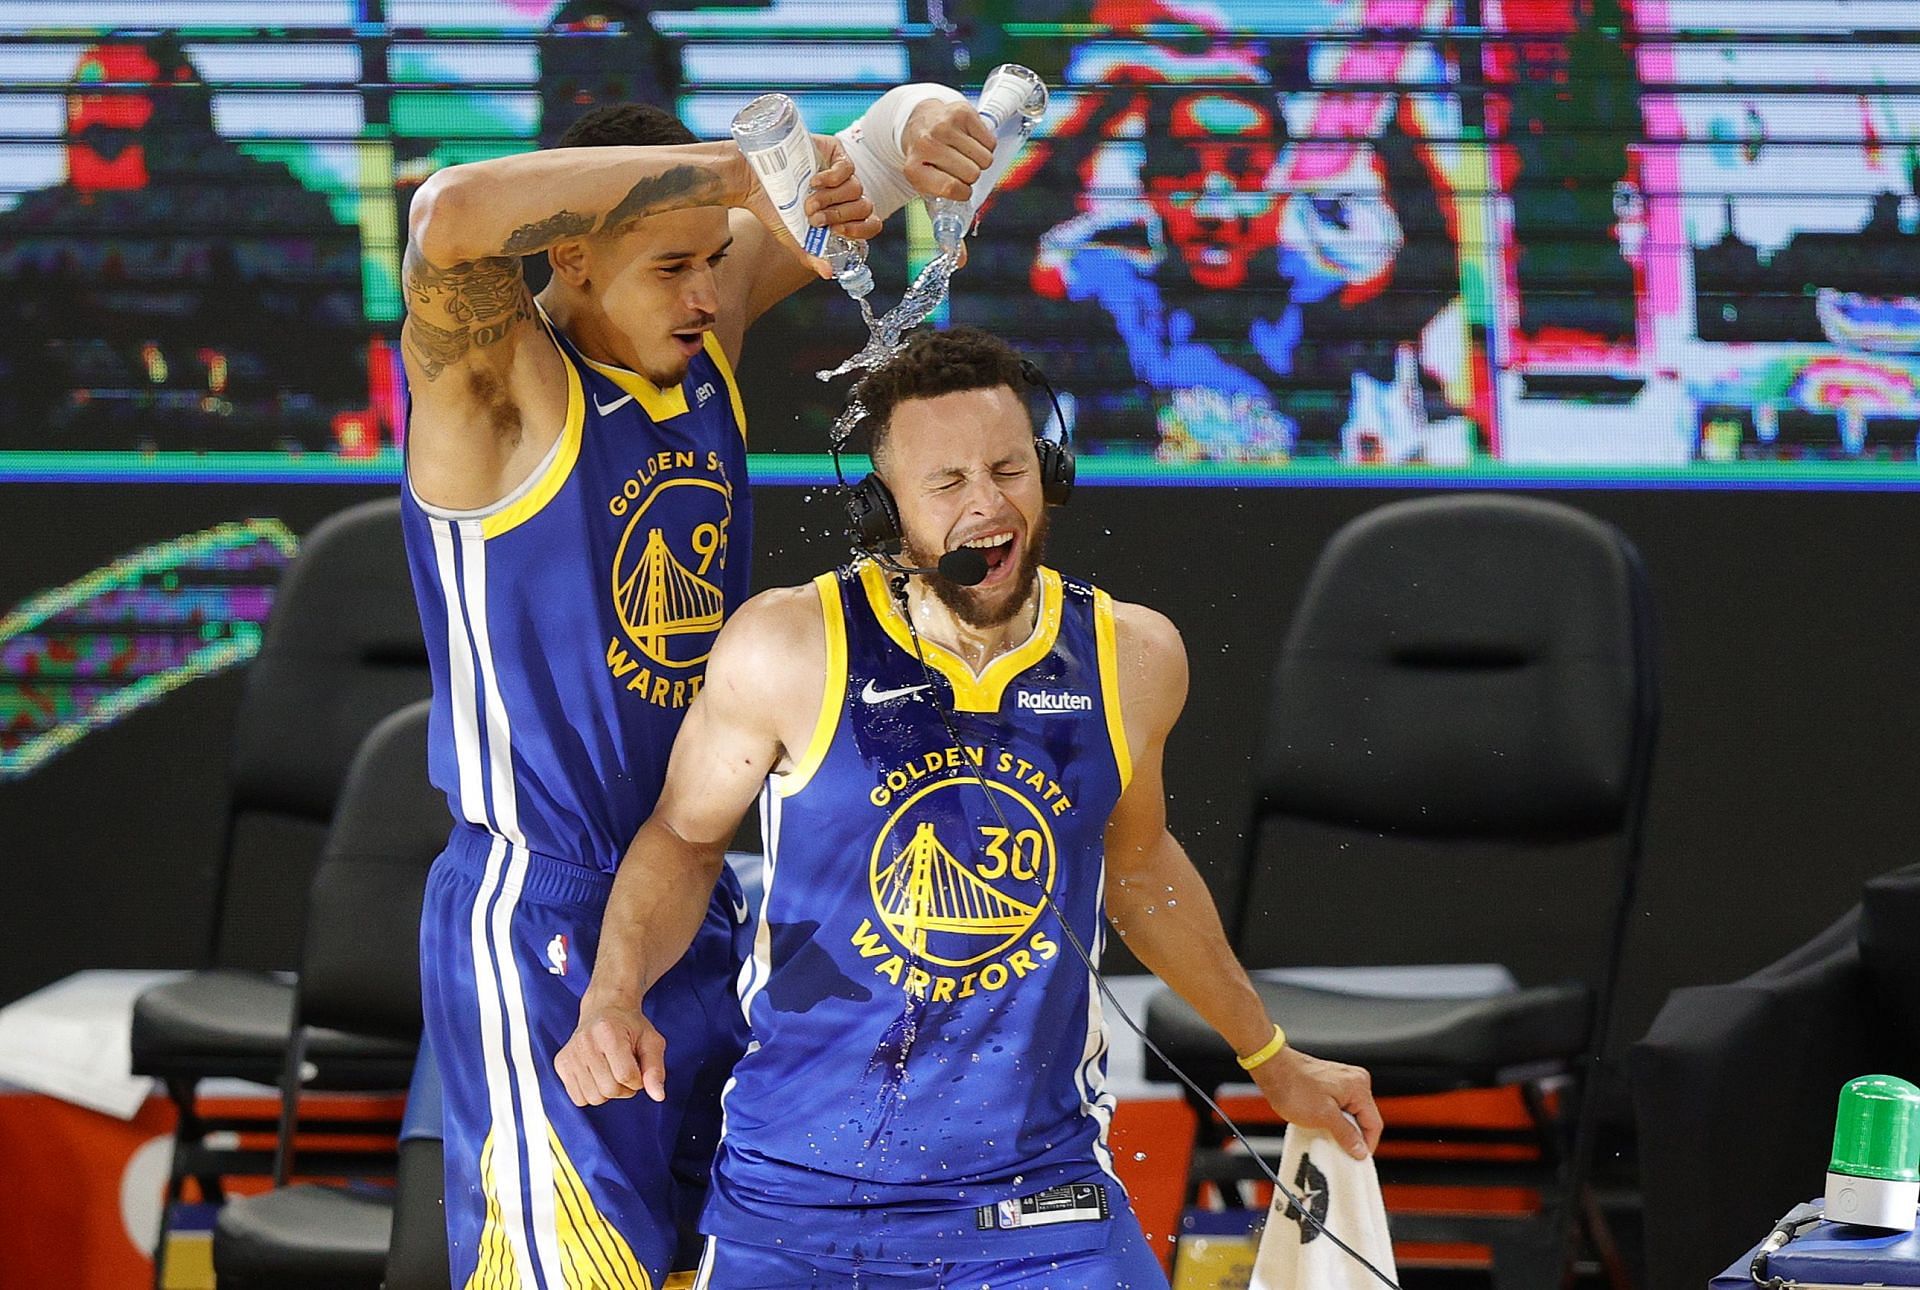 Juan Toscano-Anderson proved he could play next to Steph Curry